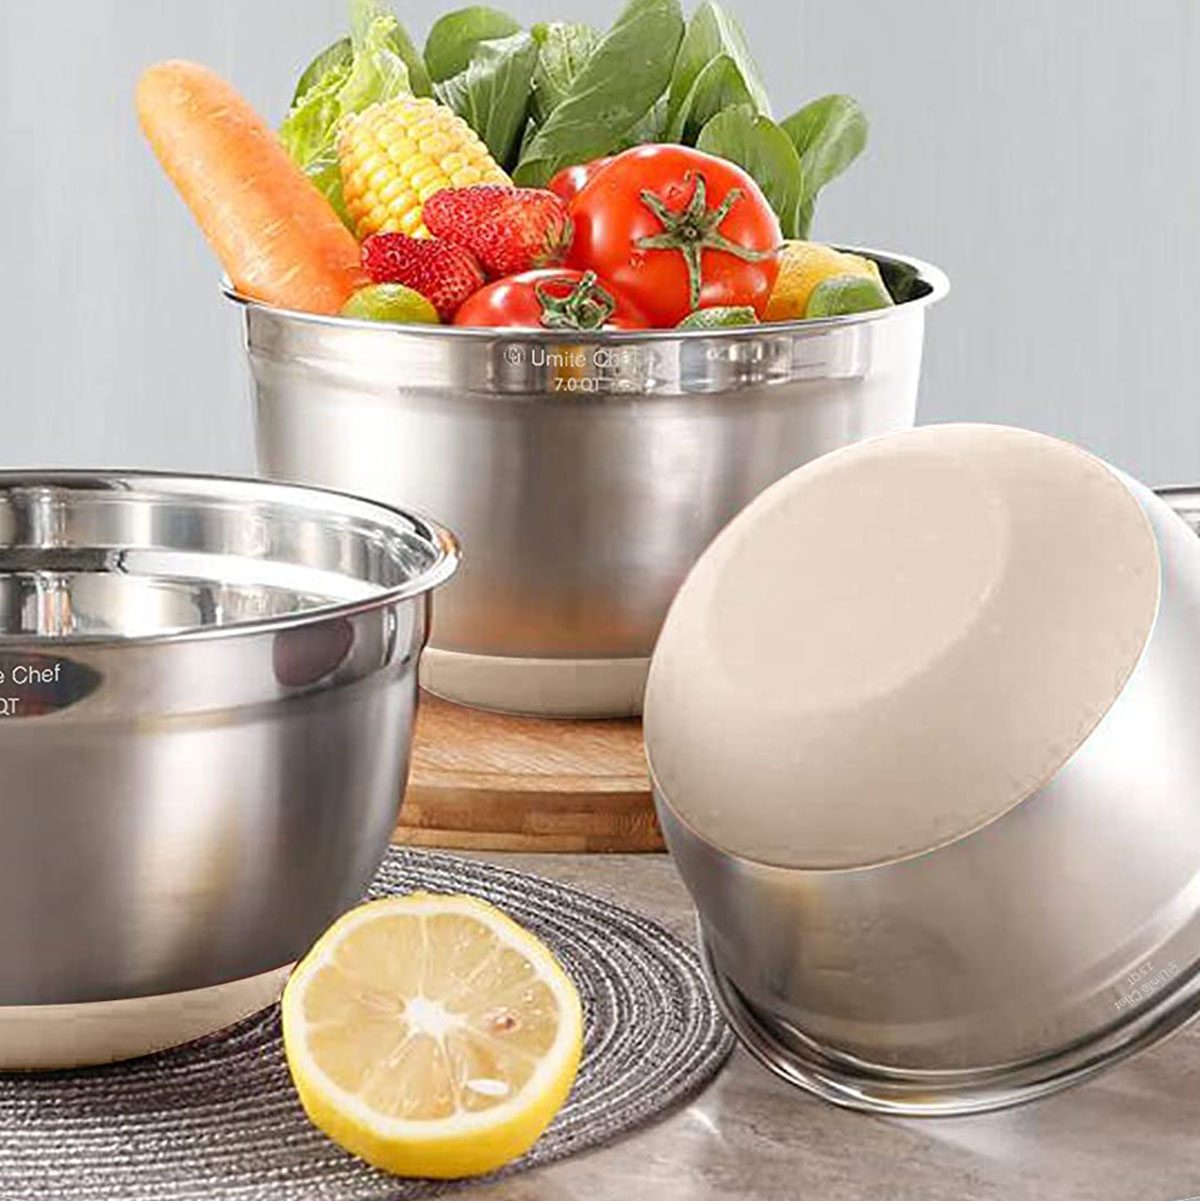 The Top 13 Kitchen Tools Every Cook Needs in 2023